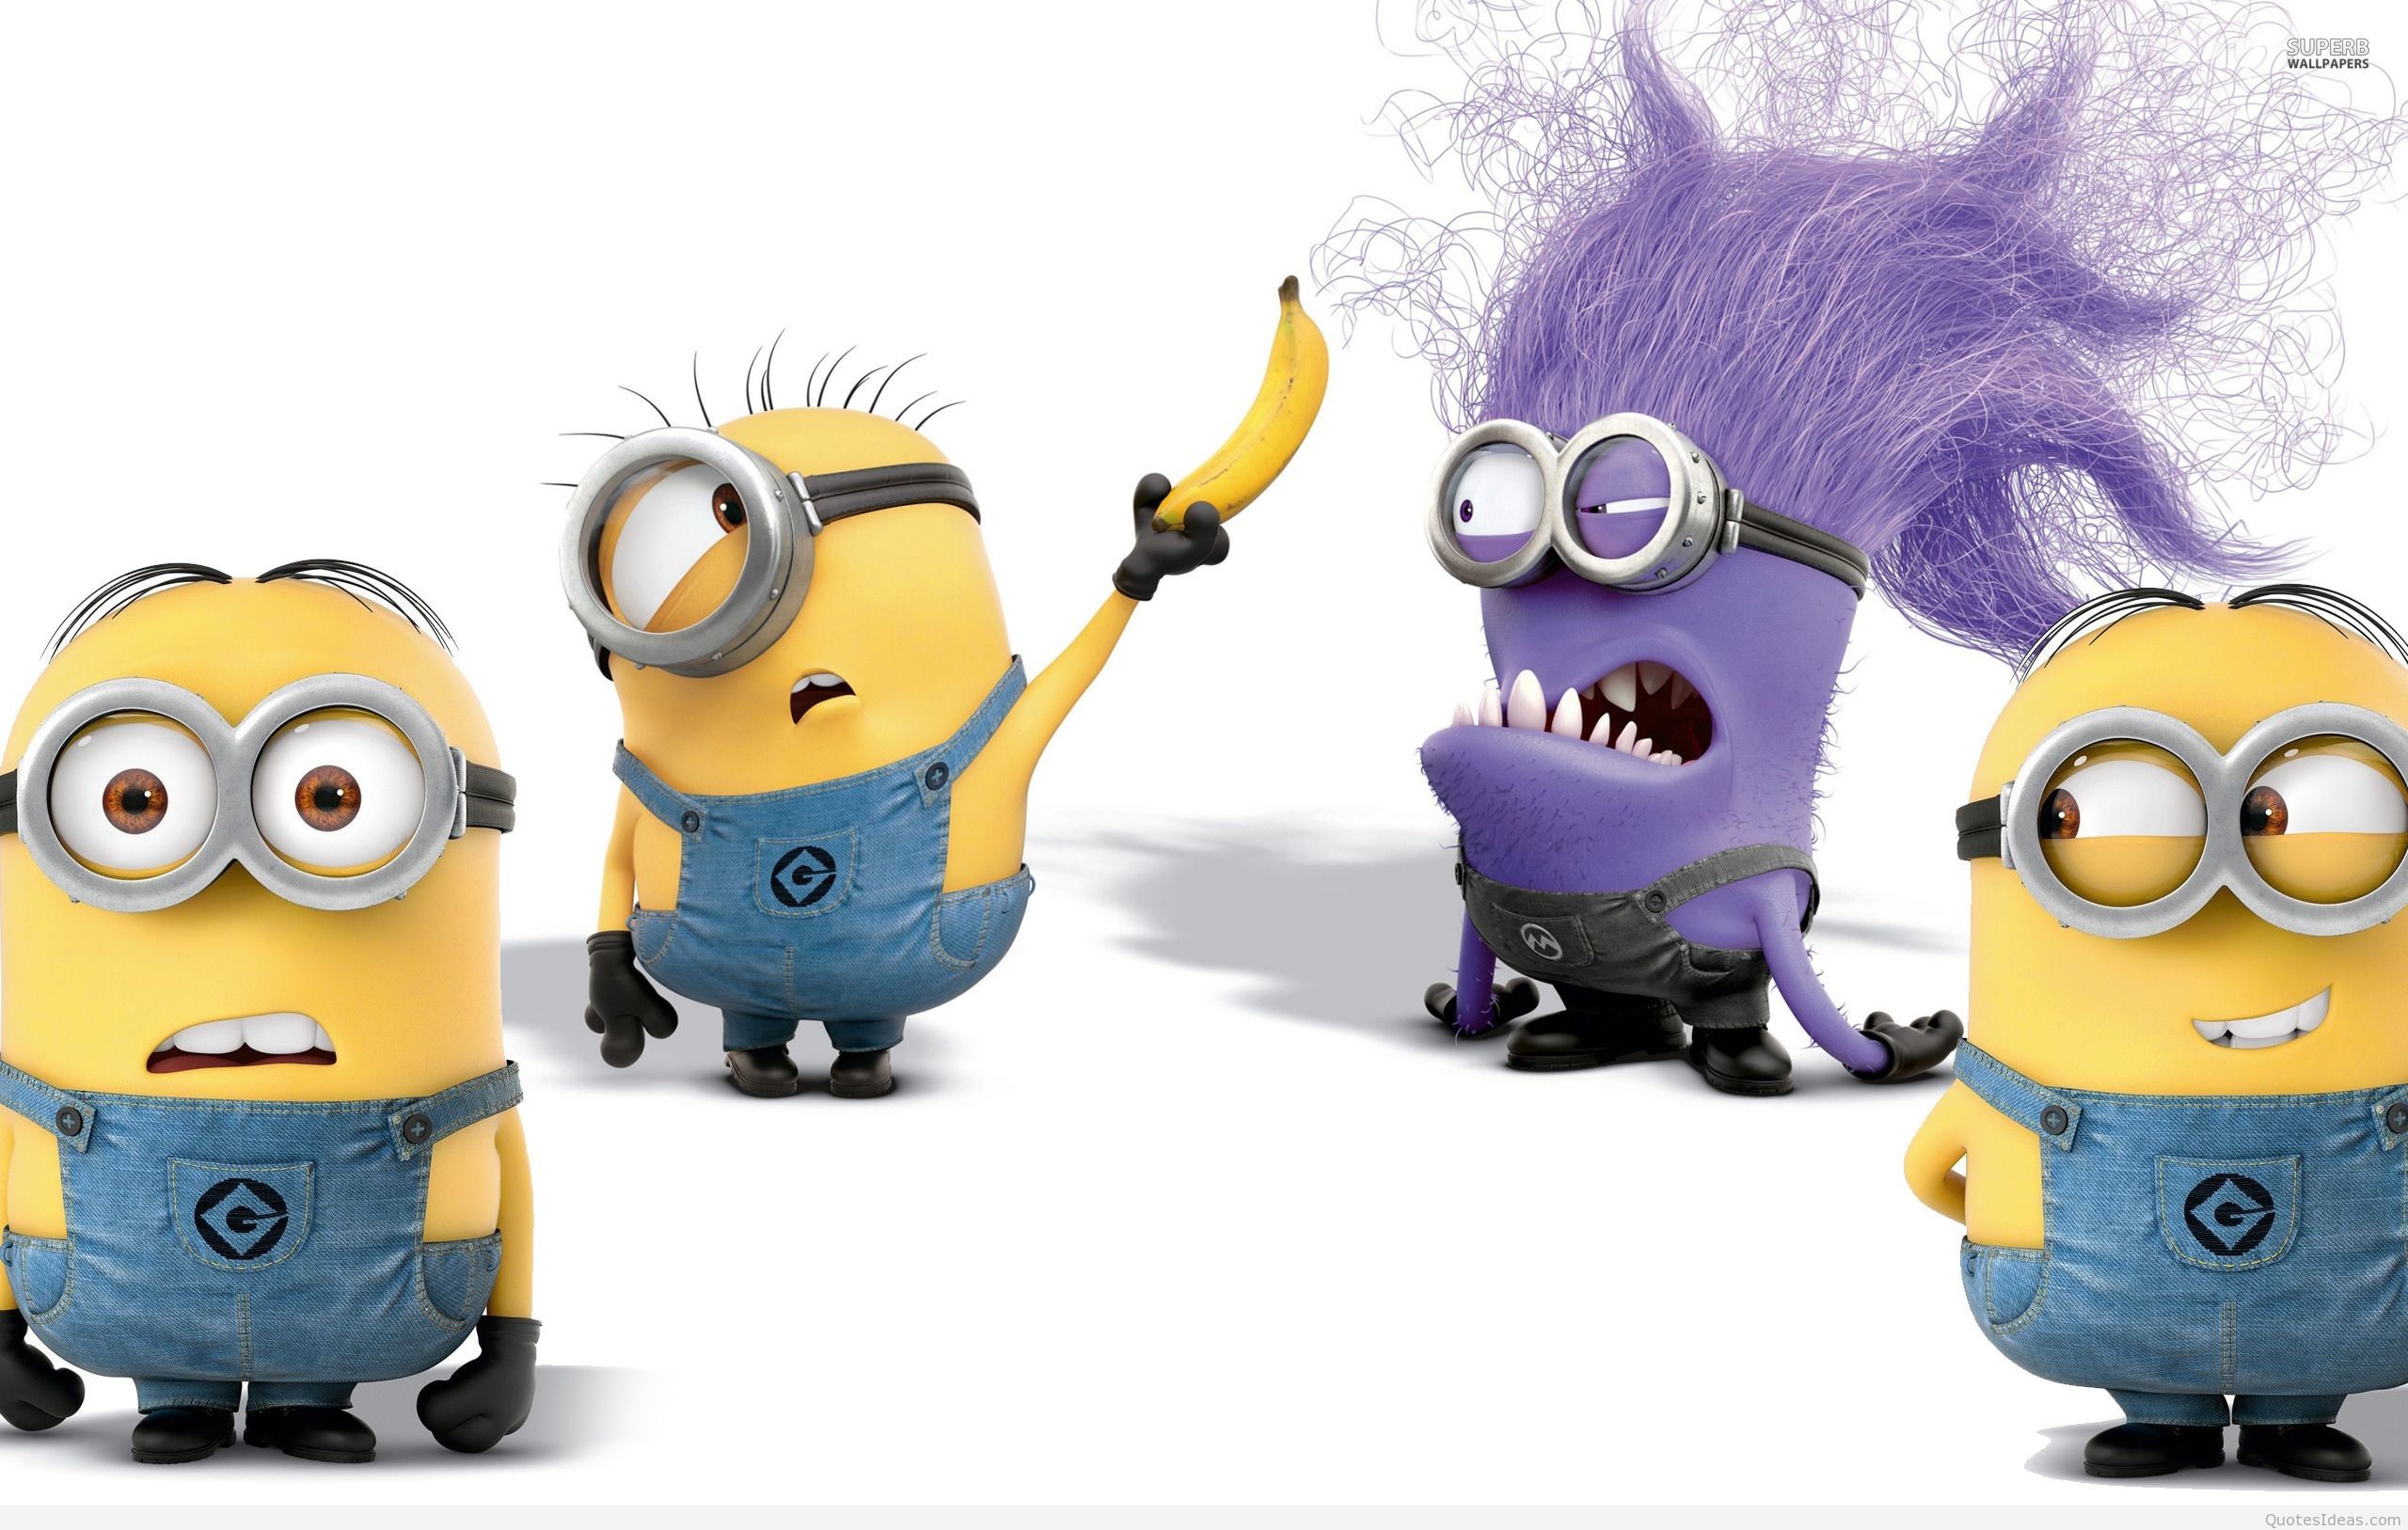 Minions despicable me 2 wallpapers funny movie images